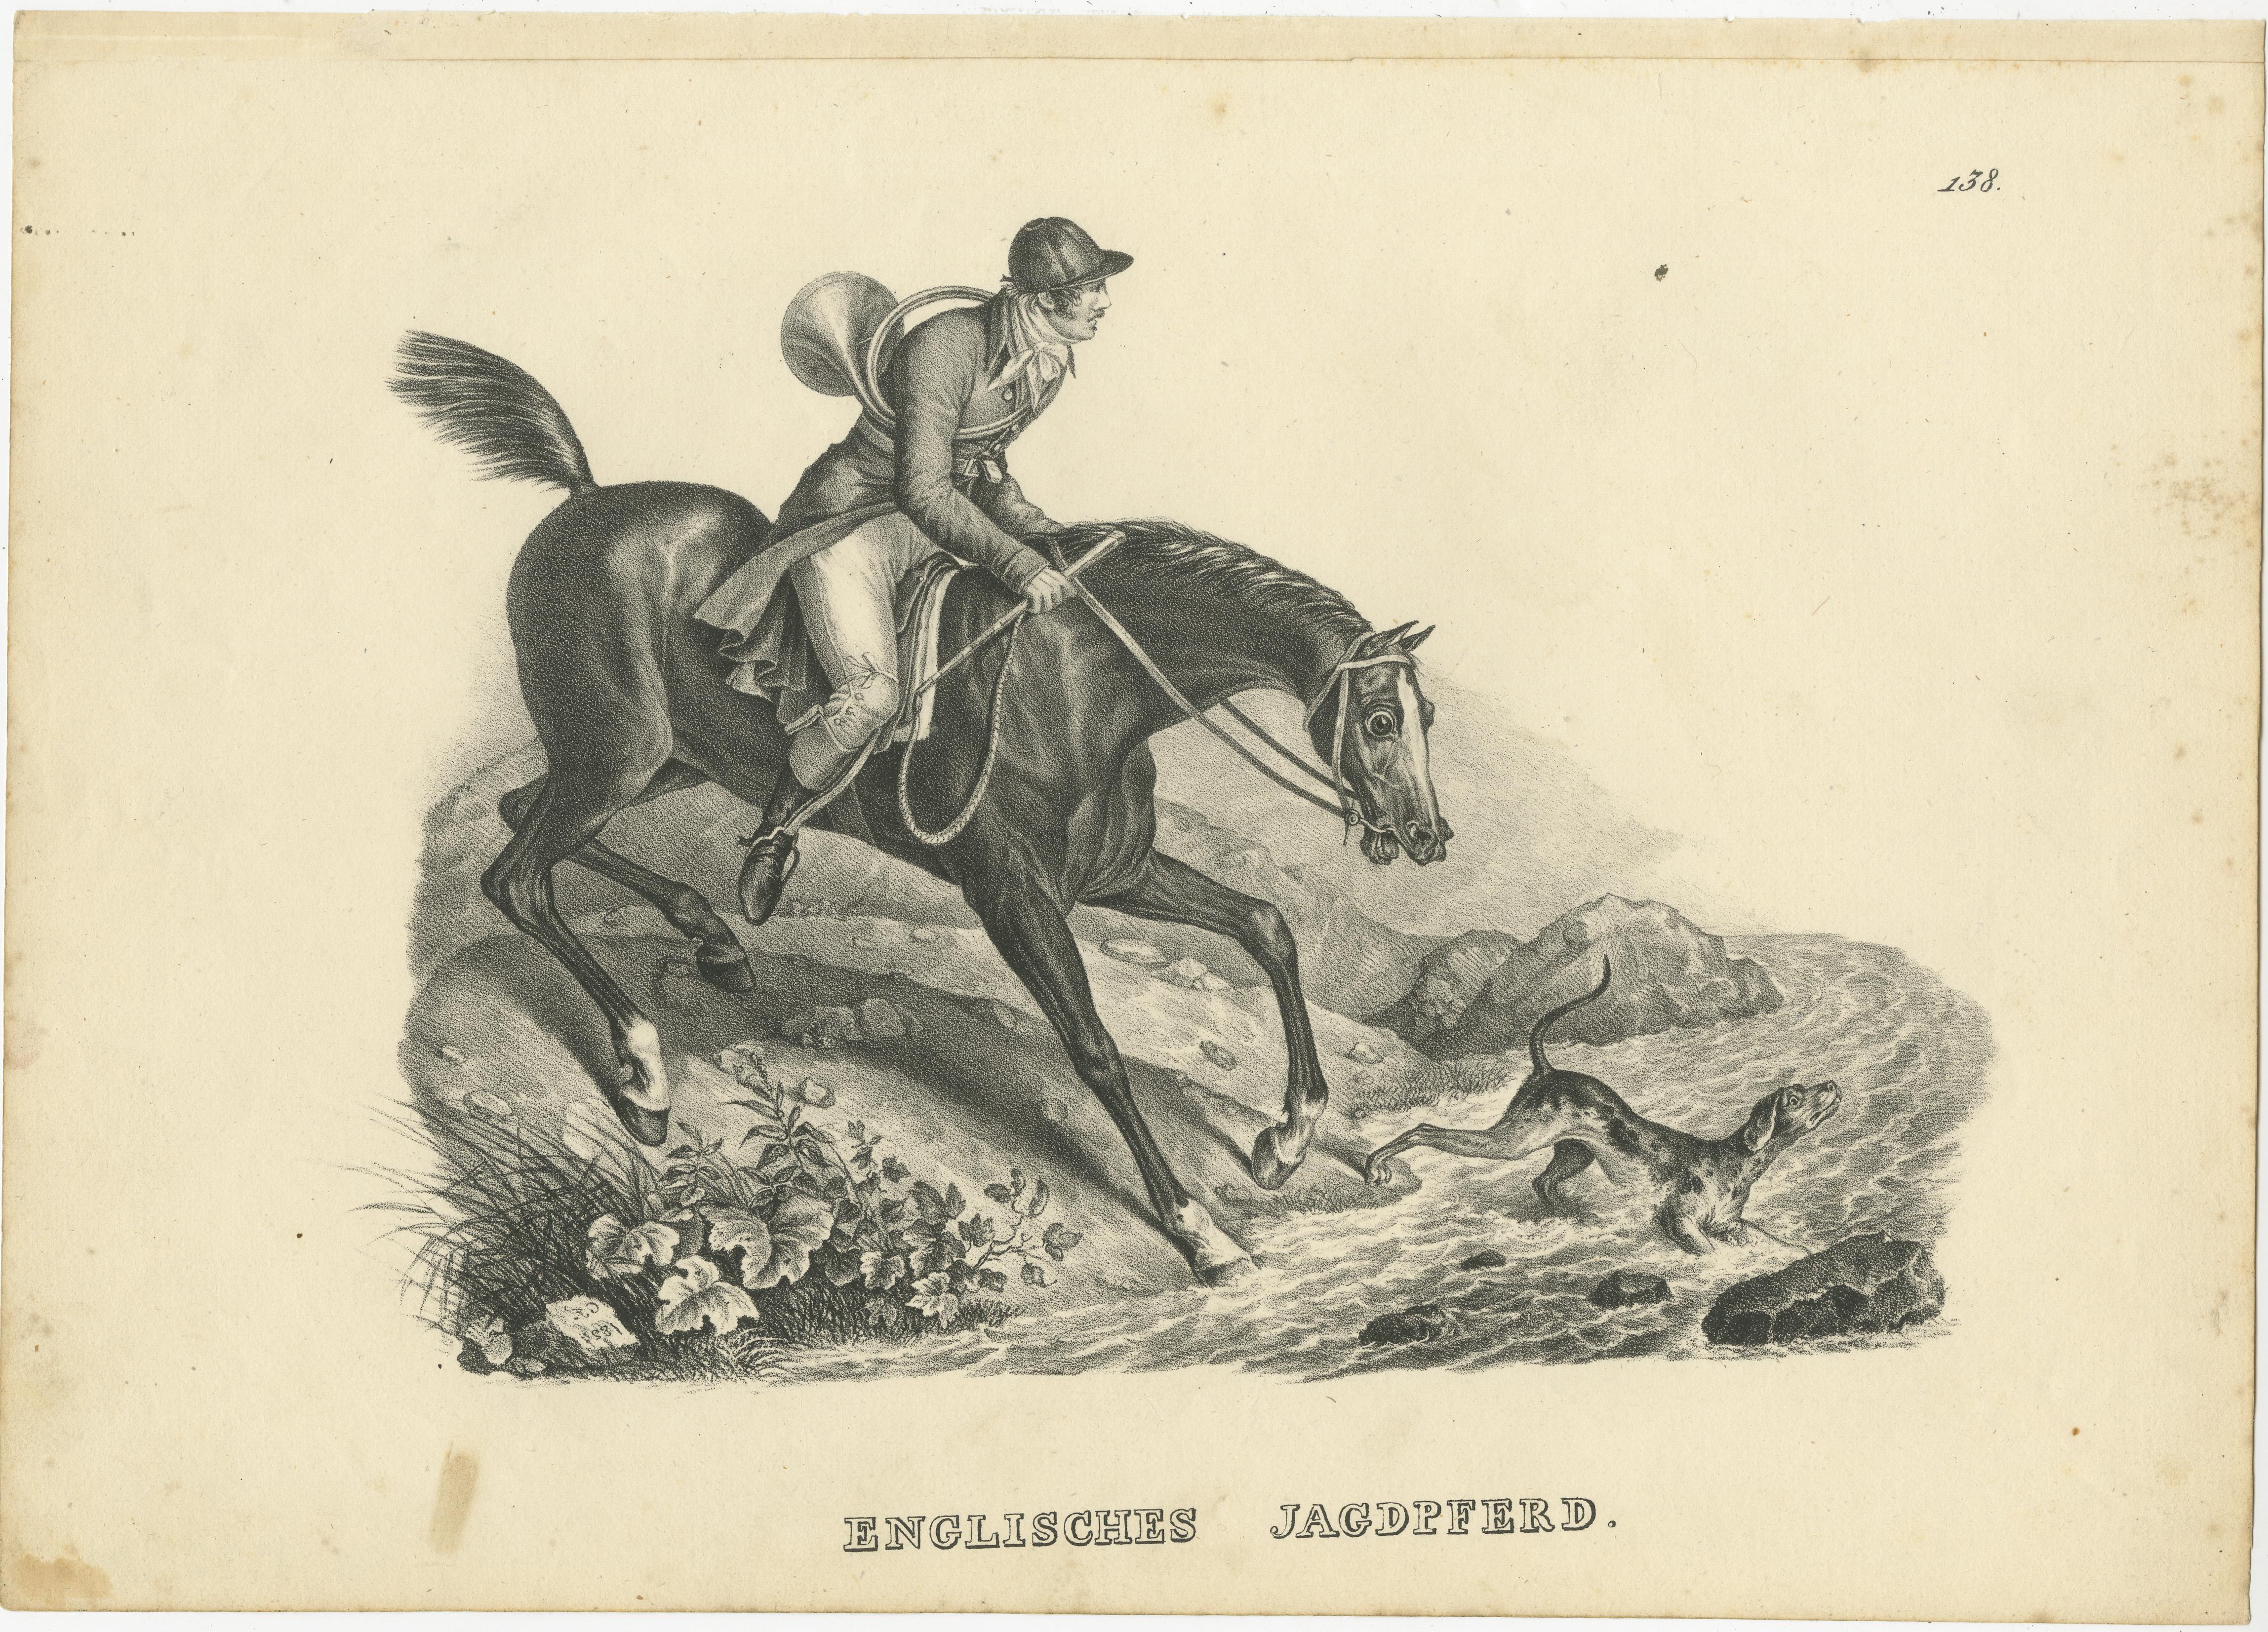 Antique print titled 'Englisches Jagdpferd'. Lithograph of an English hunting horse by Karl Joseph Brodtmann (1787-1862), one of the most accomplished lithographers of the early-nineteenth century. Born in the city of Überlingen near the